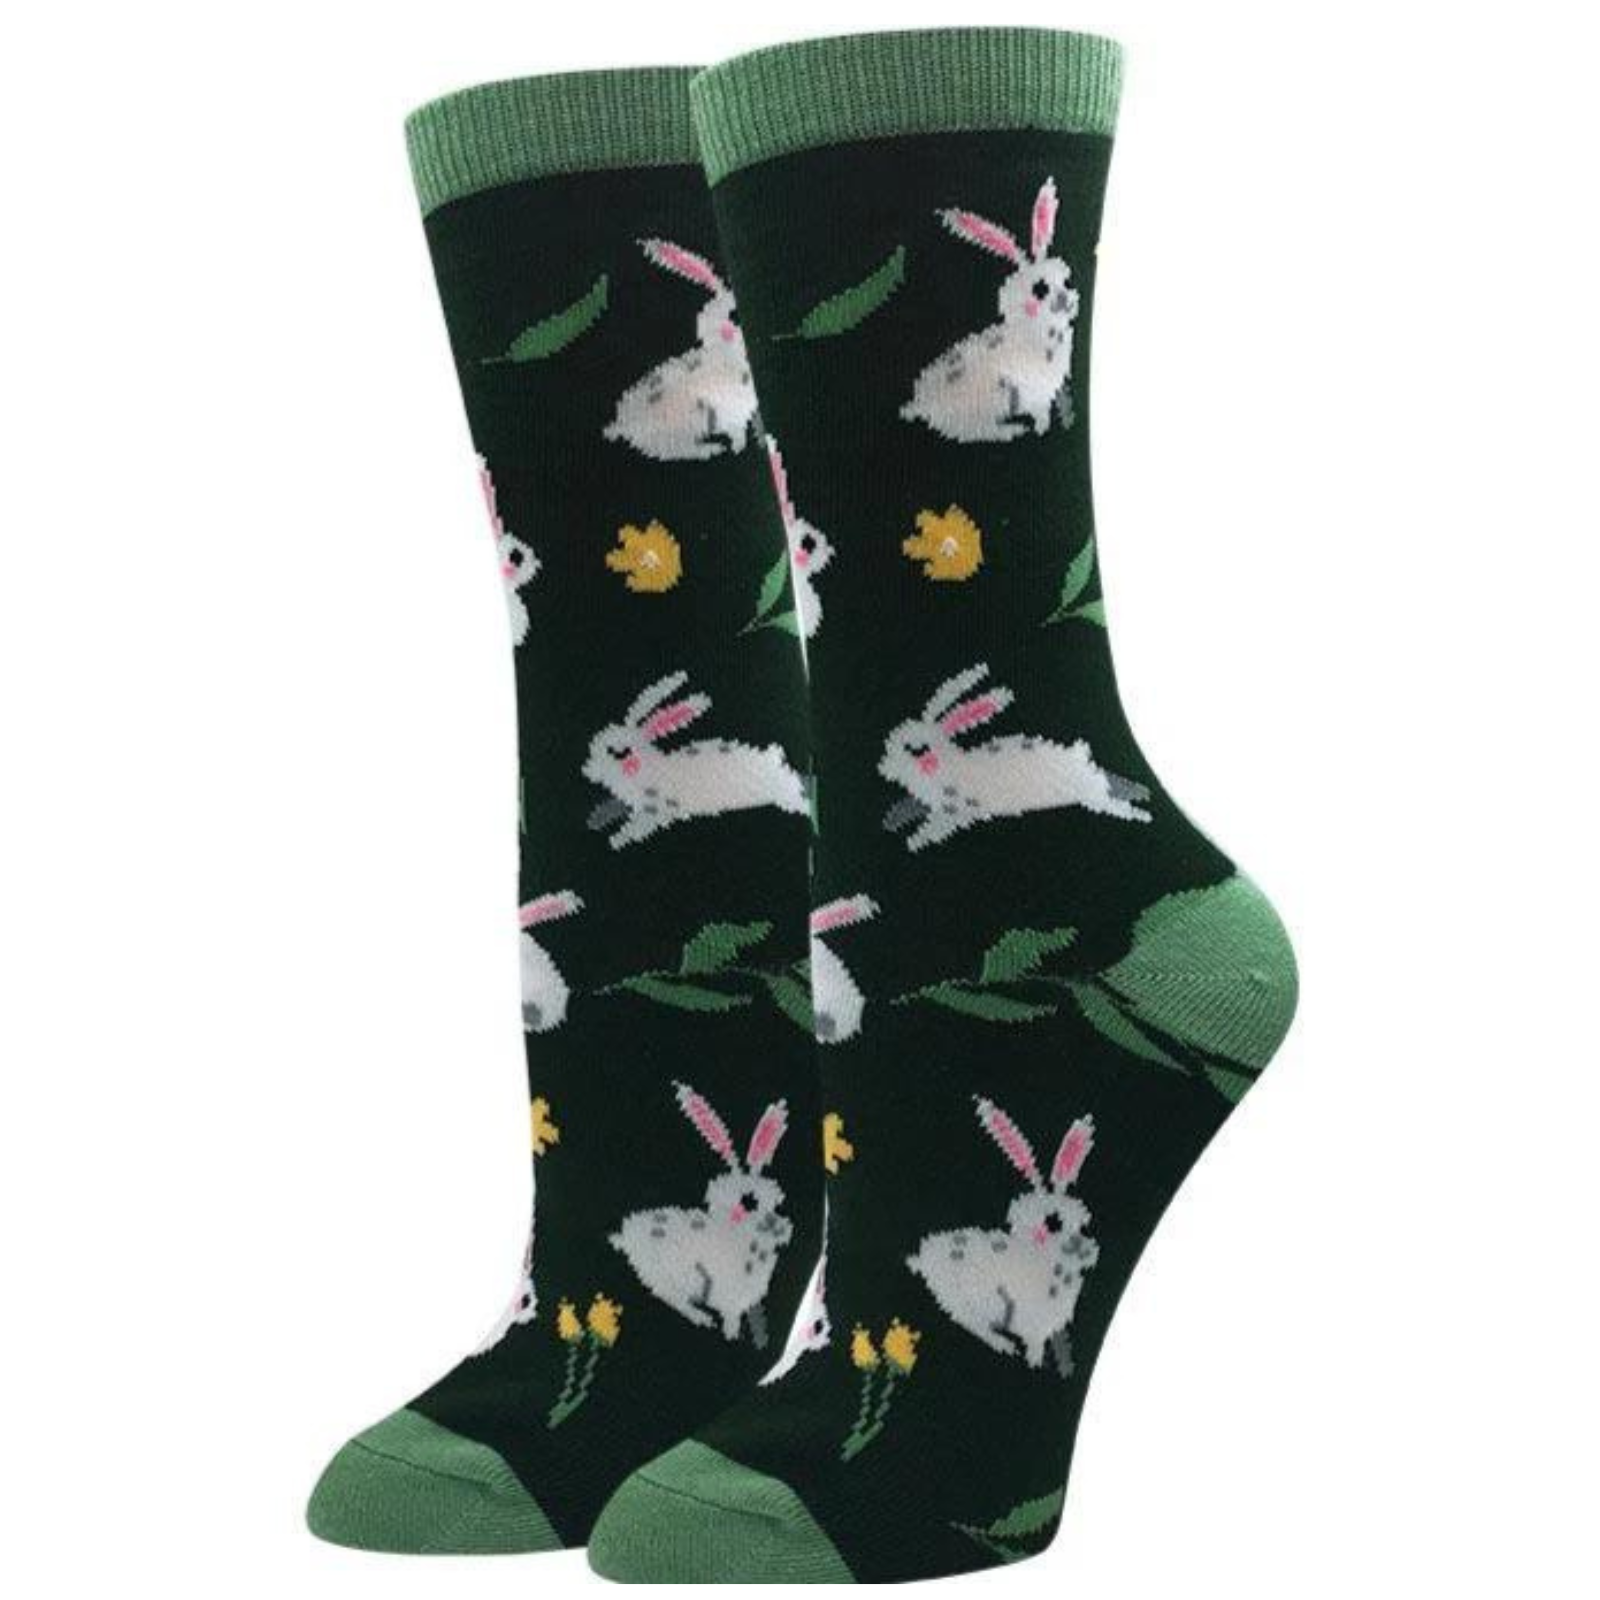 Sock Harbor Bunny women's crew sock featuring green sock with white bunny rabbits all over shown on display feet